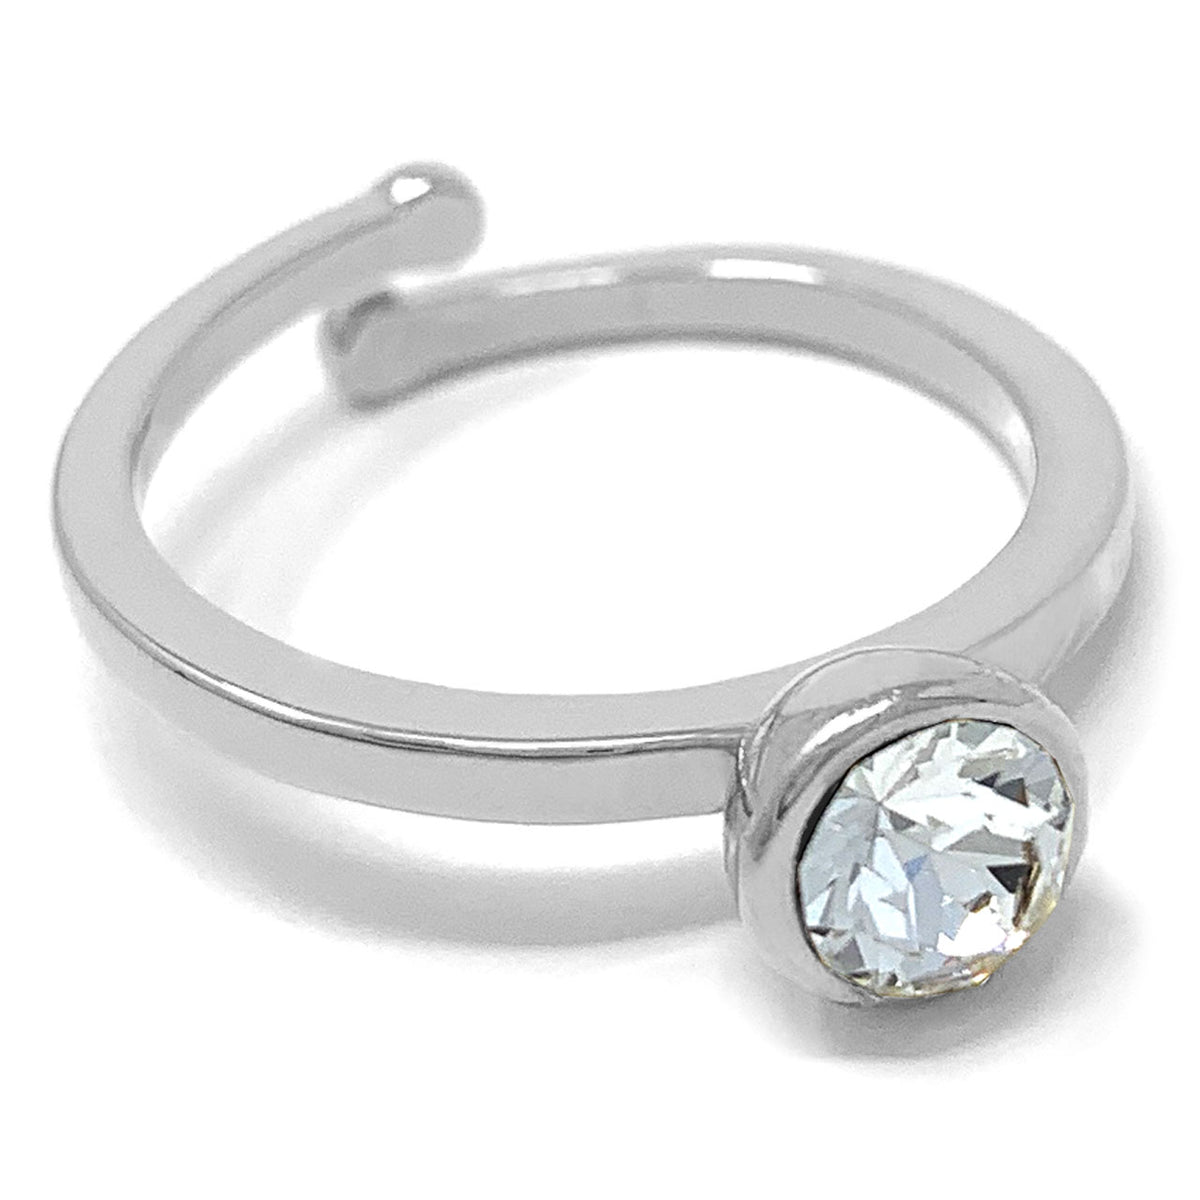 Harley Adjustable Ring with White Clear Round Crystals from Swarovski Silver Toned Rhodium Plated - Ed Heart